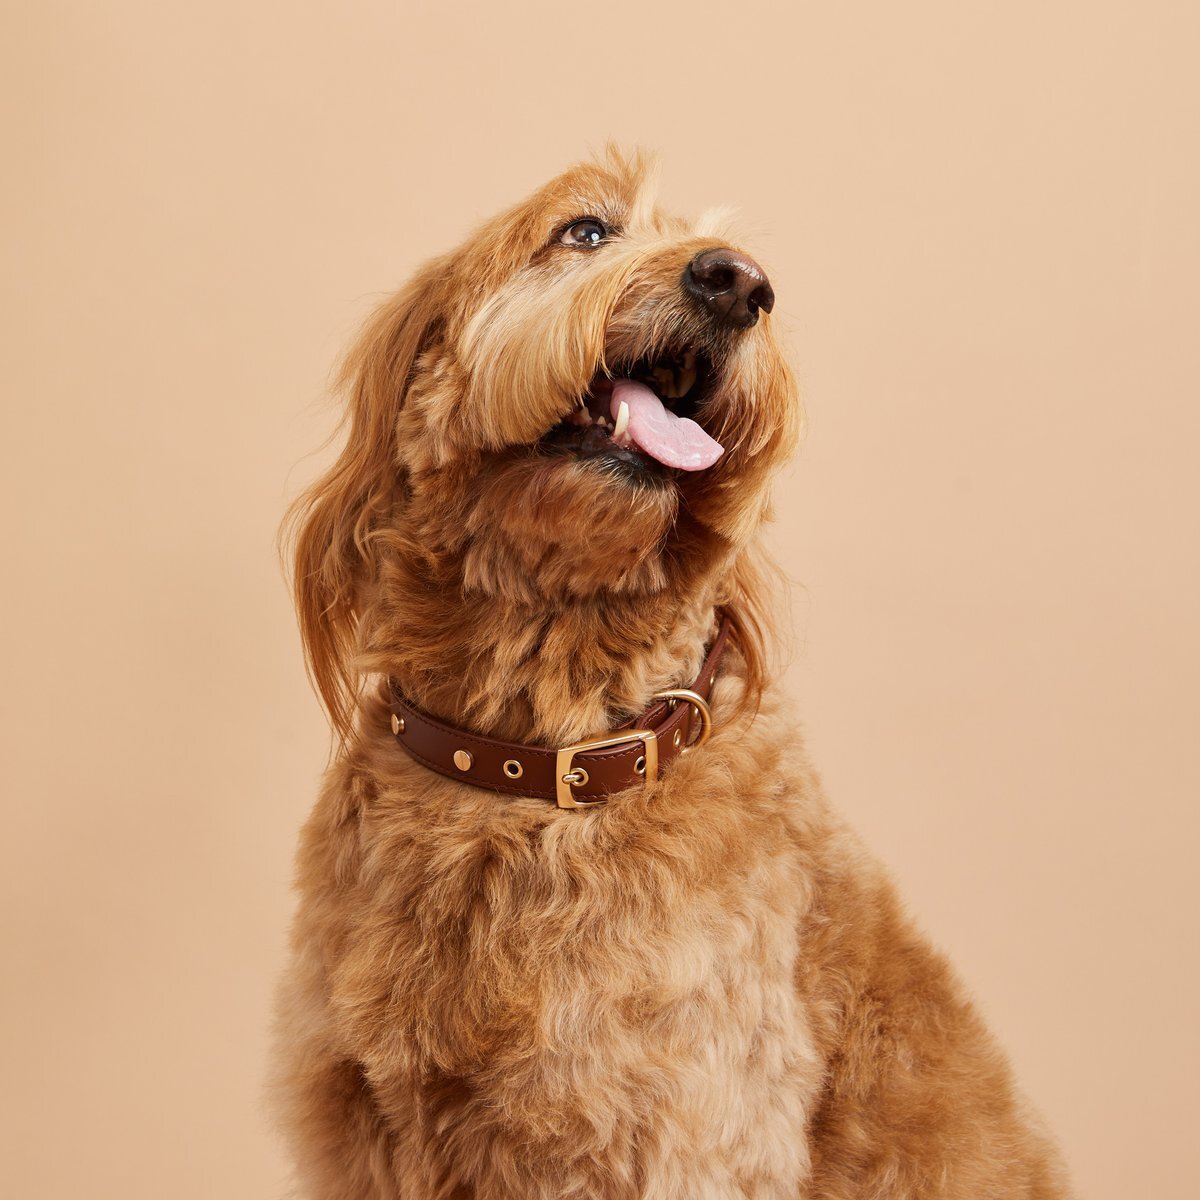 Harry Barker Dog Collar On Sale in The Dapple's Best Labor Day Weekend Sales, Deals, and Promo Codes for Dog Owners, Dog Lovers, and Dogs